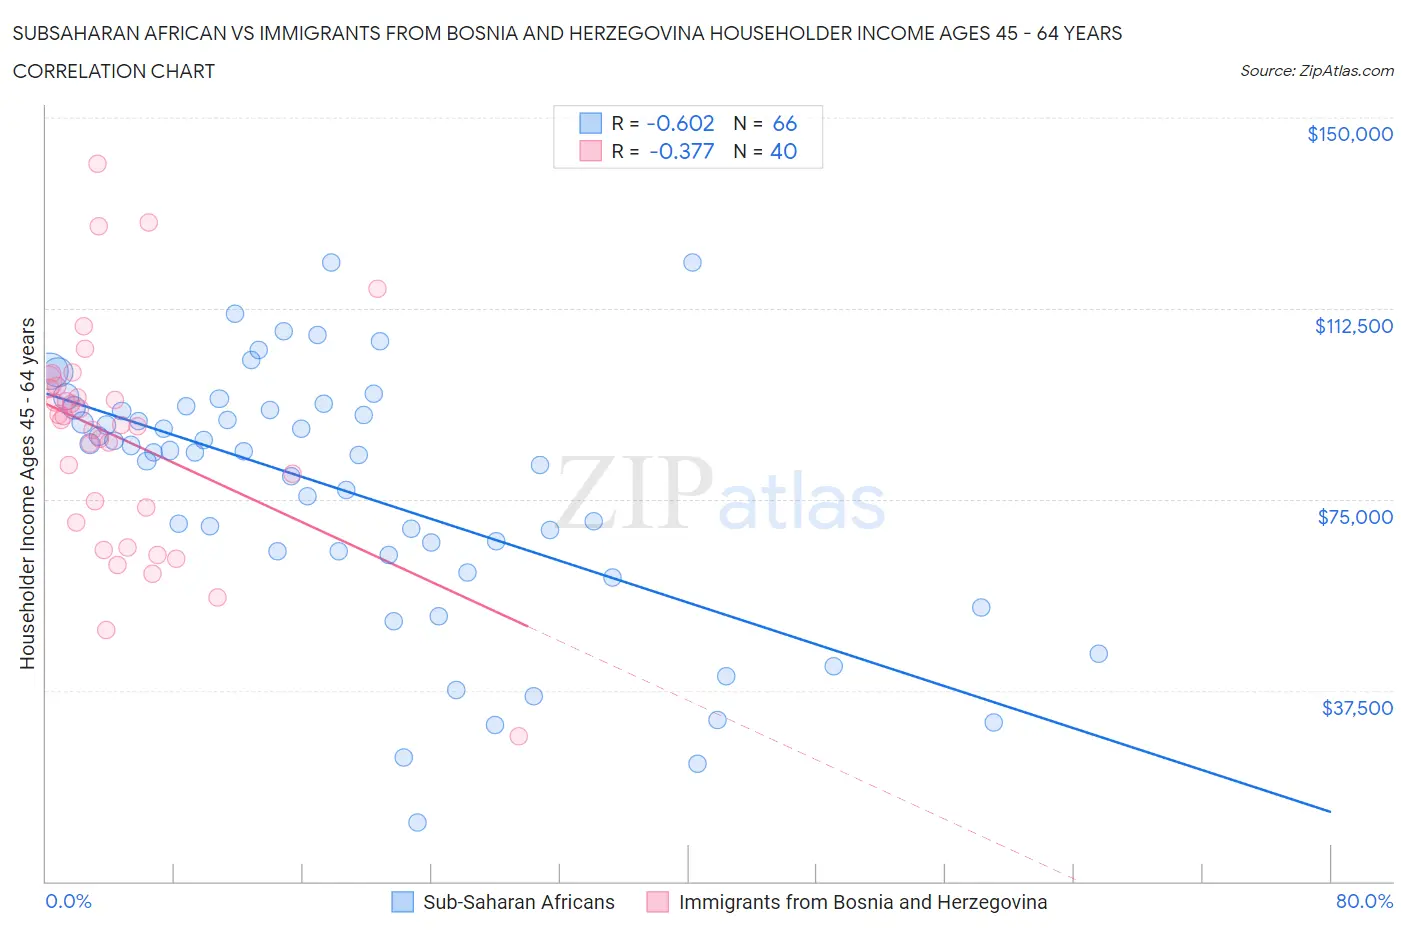 Subsaharan African vs Immigrants from Bosnia and Herzegovina Householder Income Ages 45 - 64 years